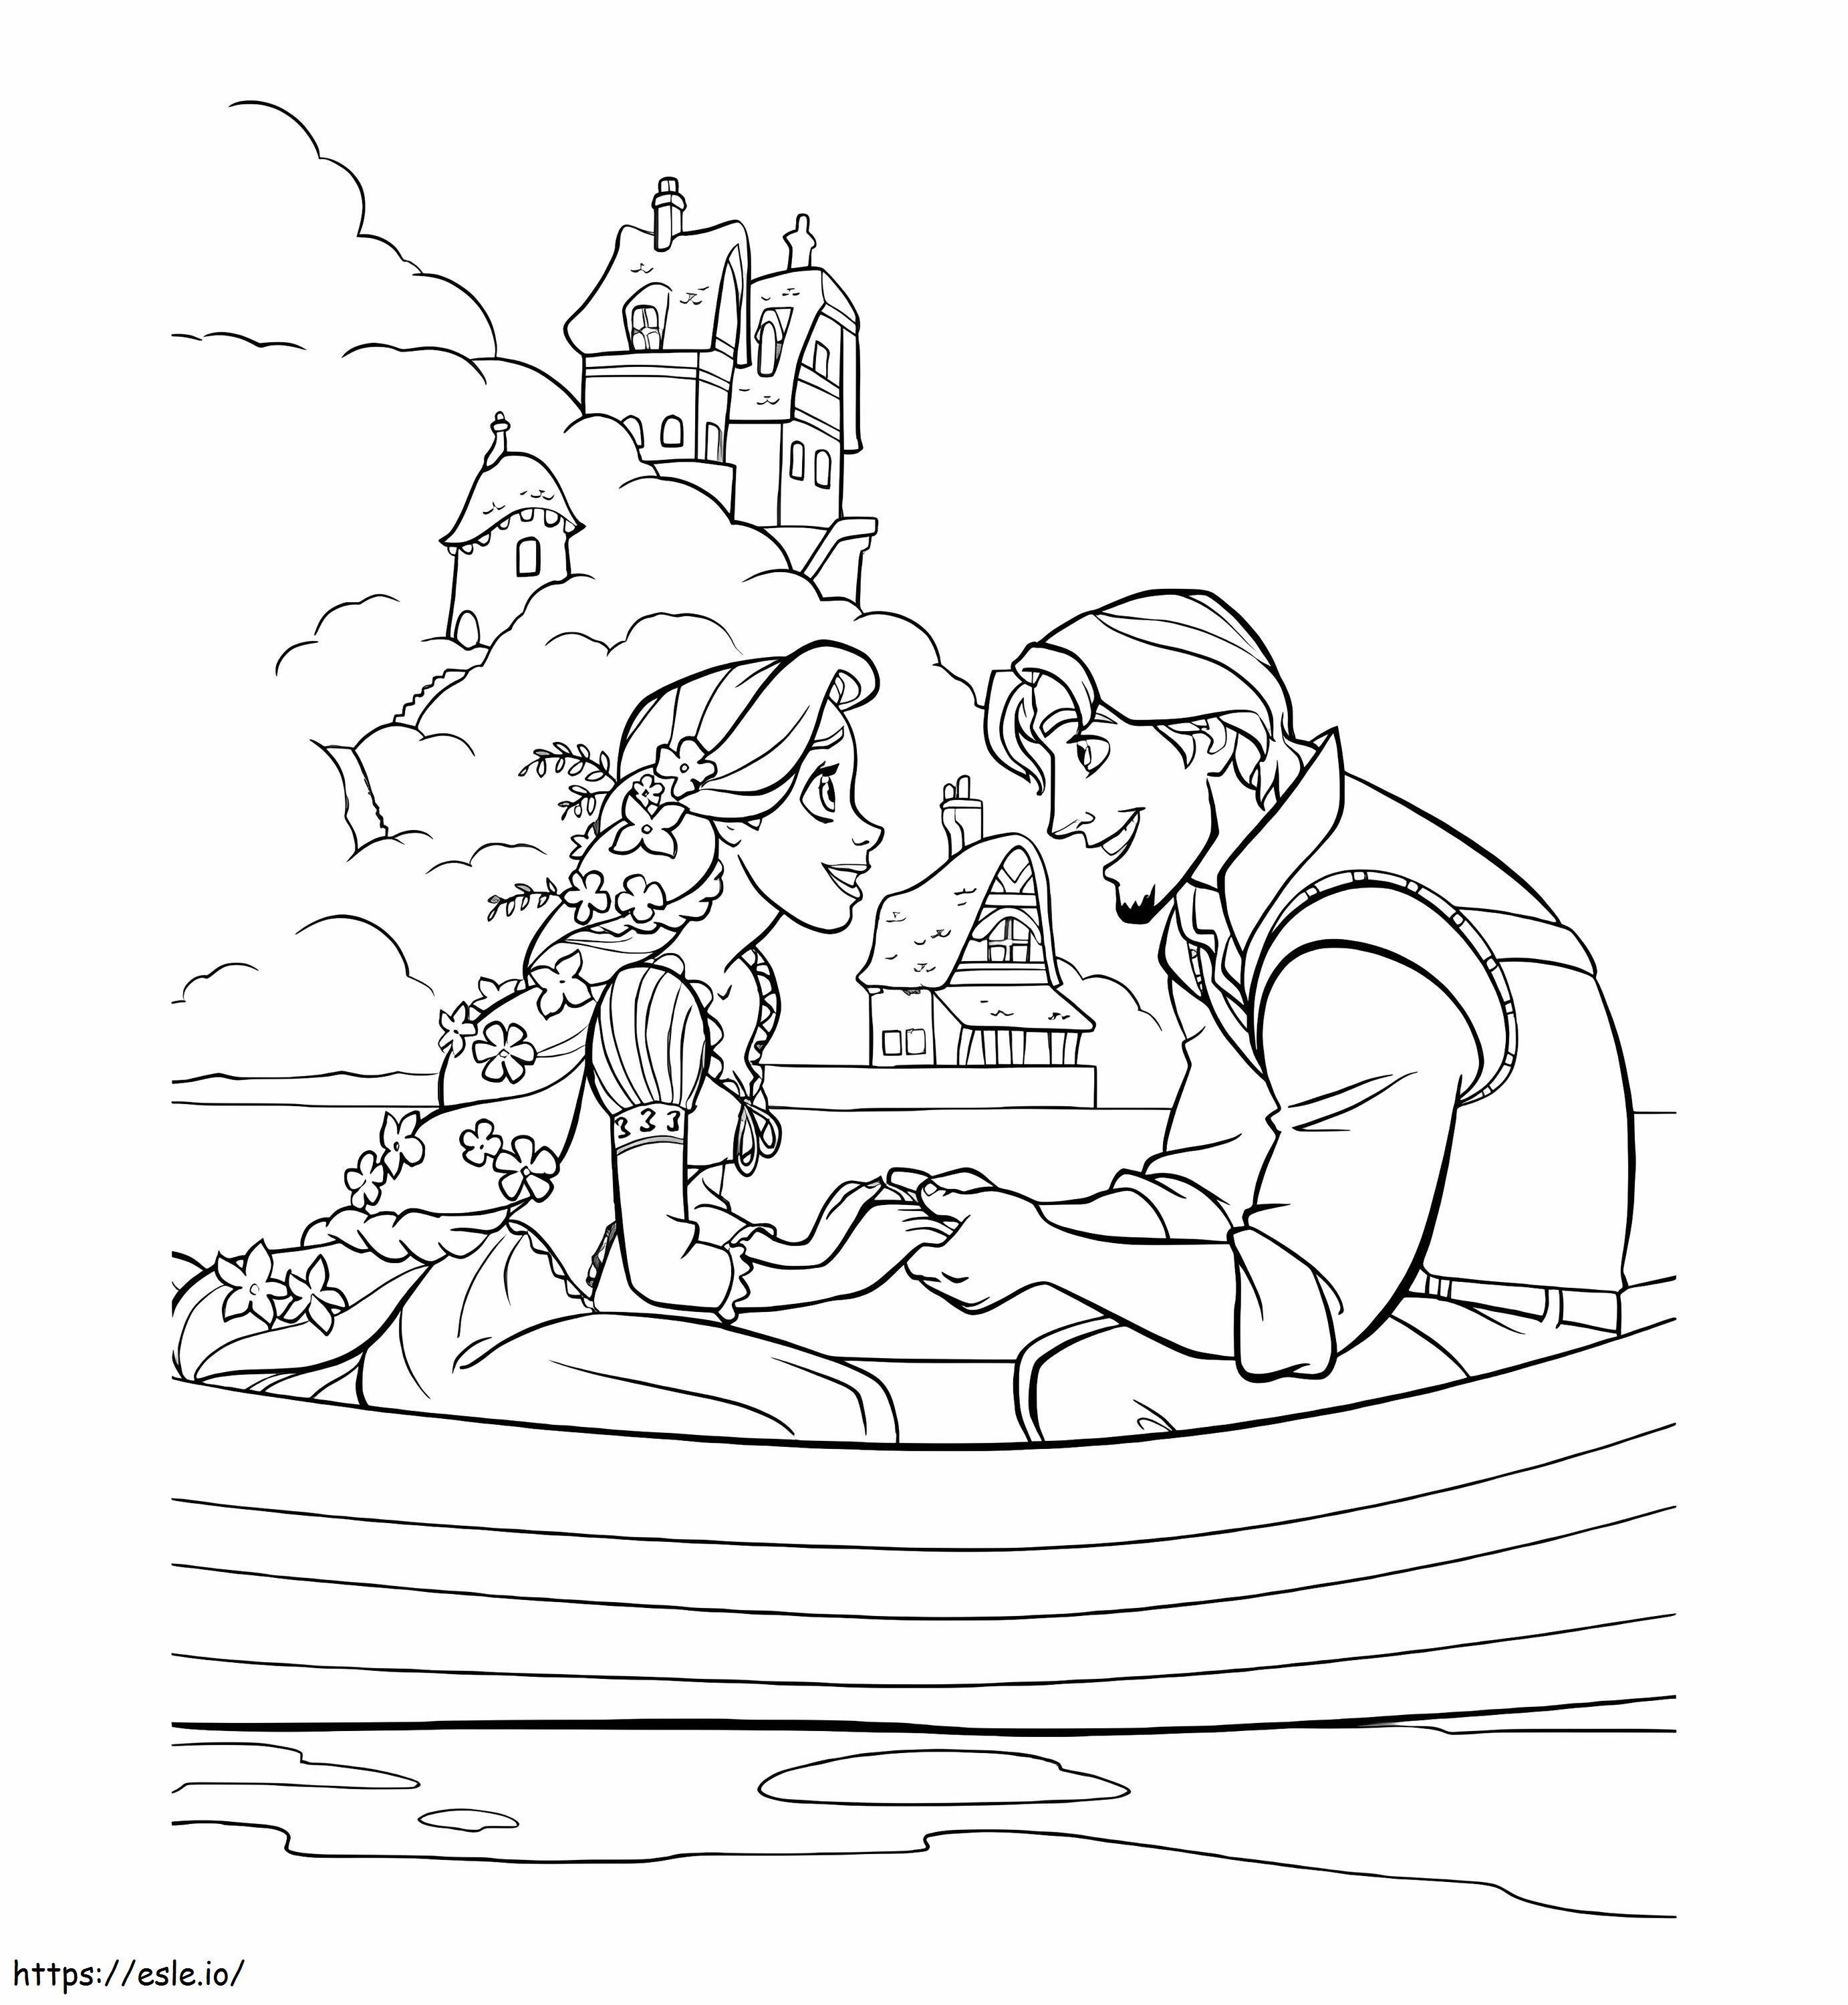 Rapunzel And Flynn Sit On The Boat coloring page